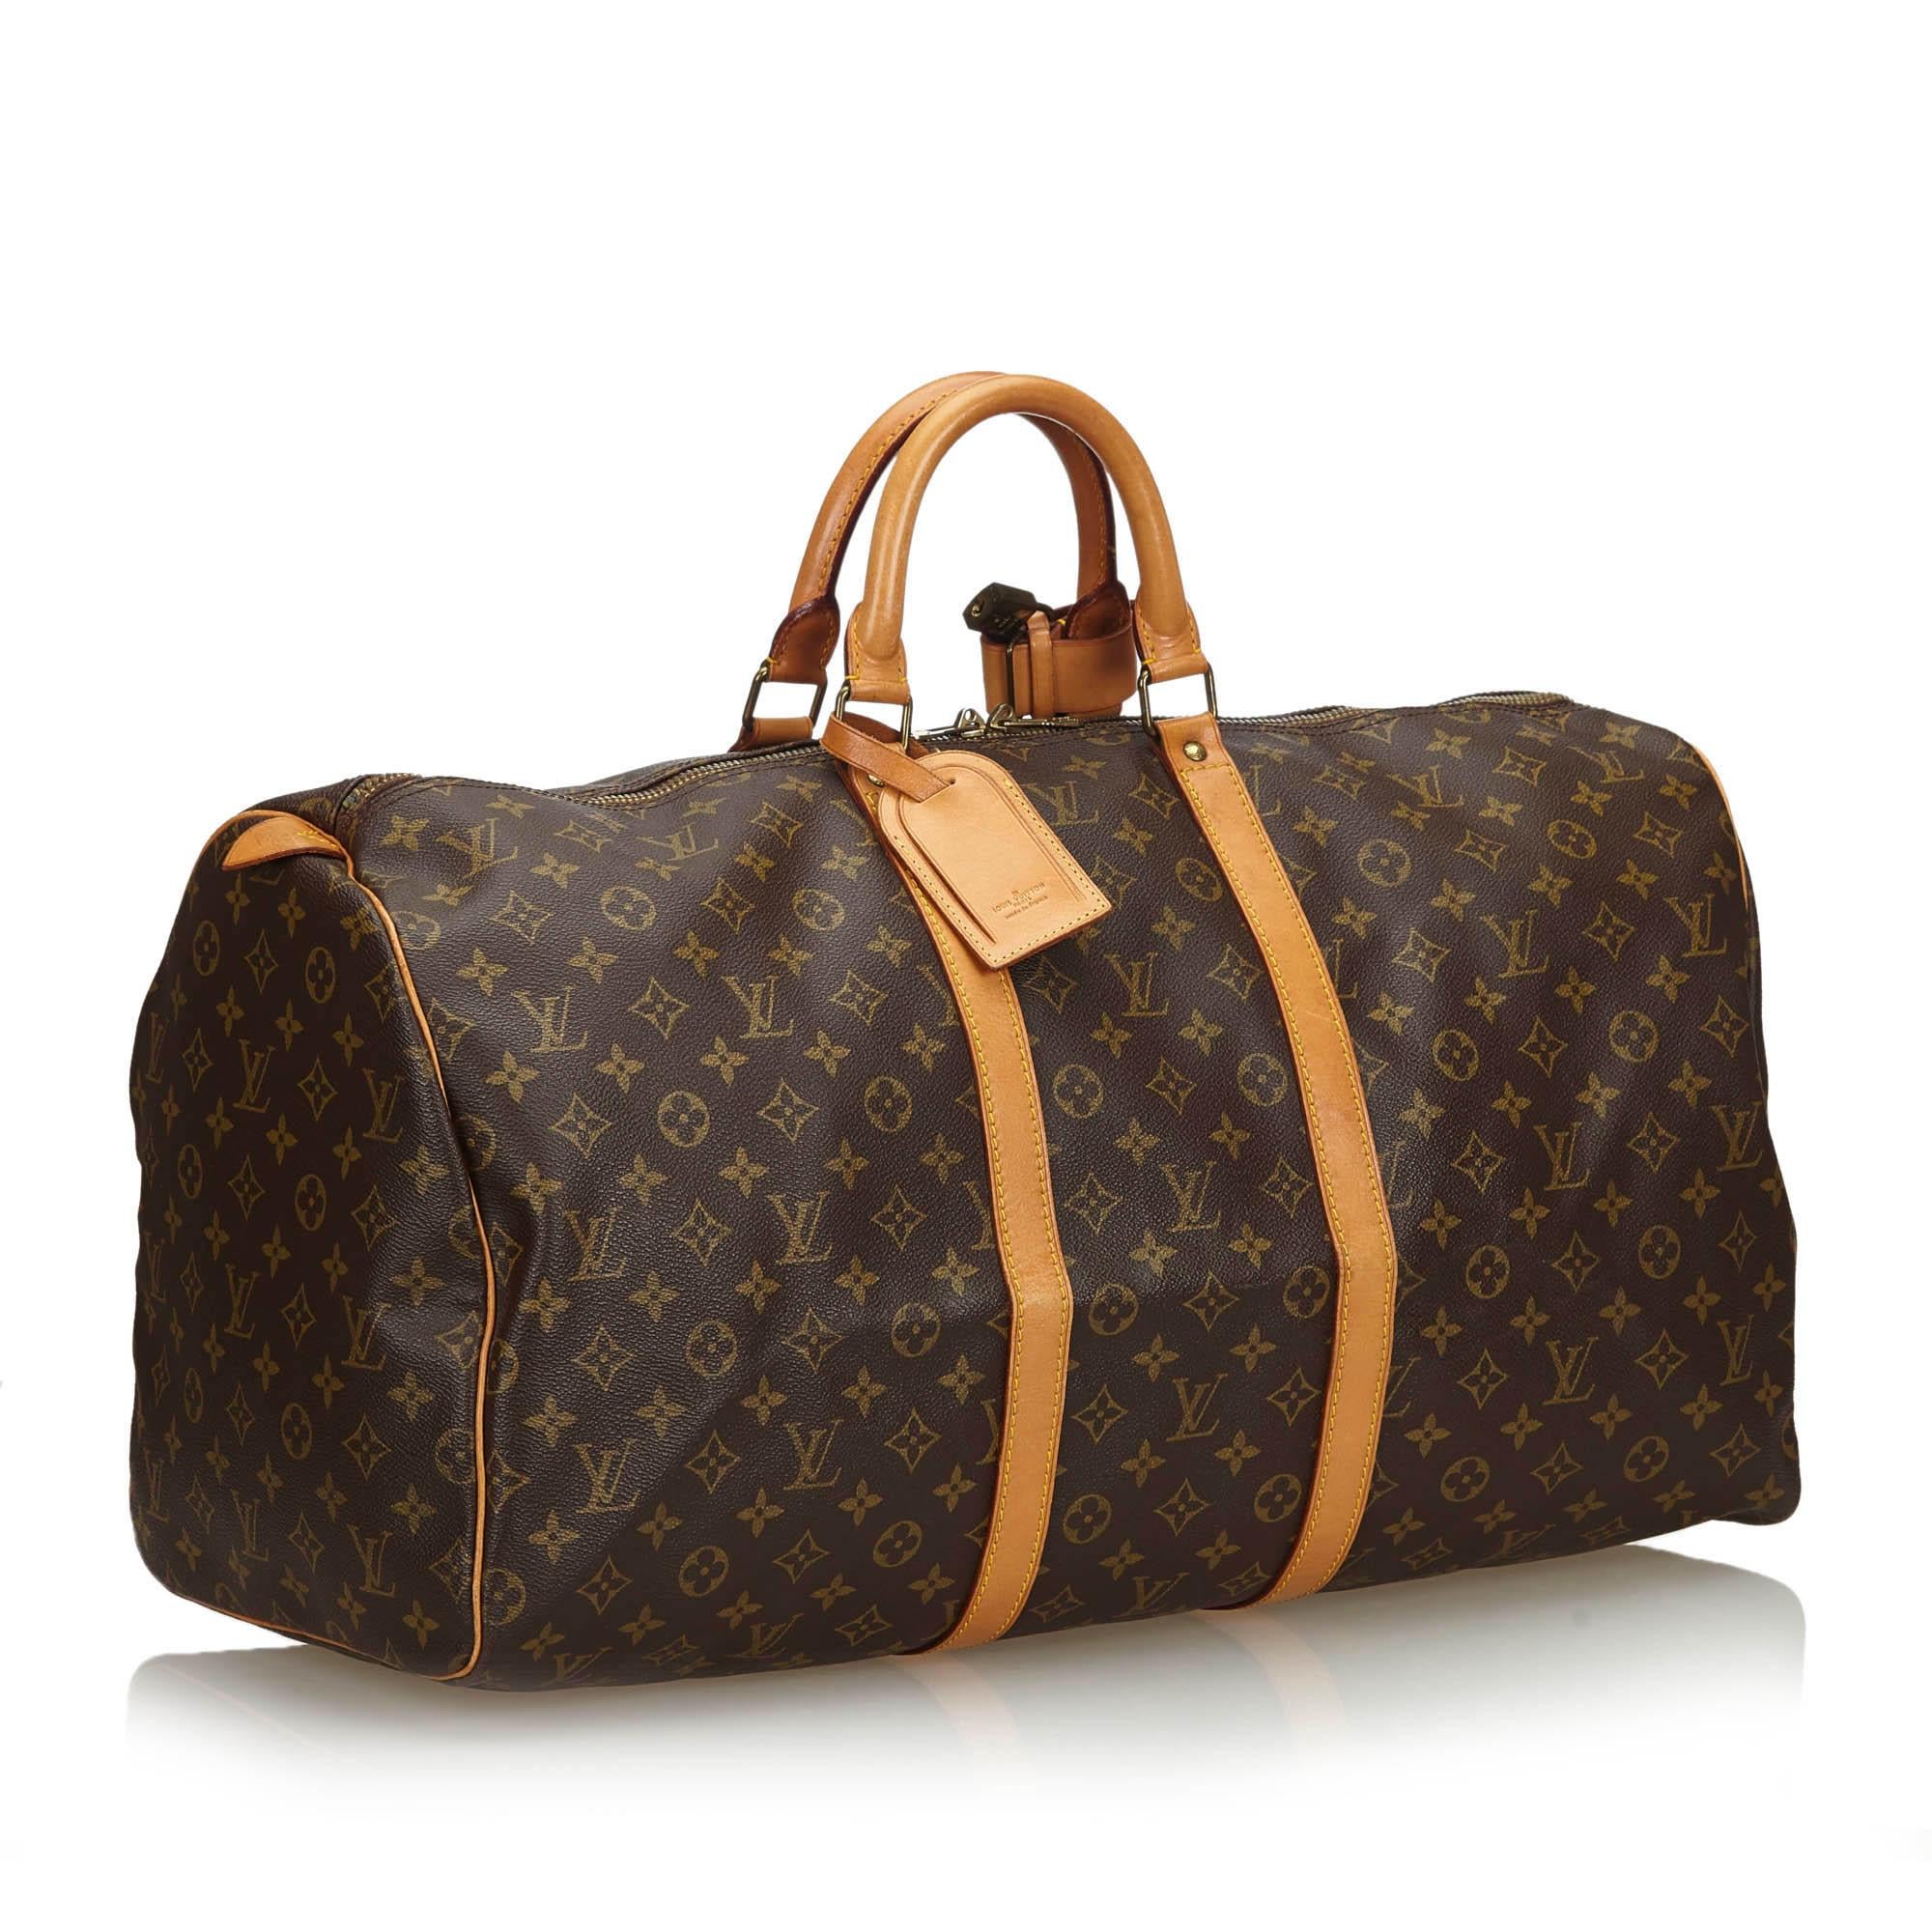 The Keepall 55 features a monogram canvas body with vachetta trim, rolled leather handles, and a top zip closure. It carries as B+ condition rating.

Inclusions: 
Padlock


Louis Vuitton pieces do not come with an authenticity card please refer to